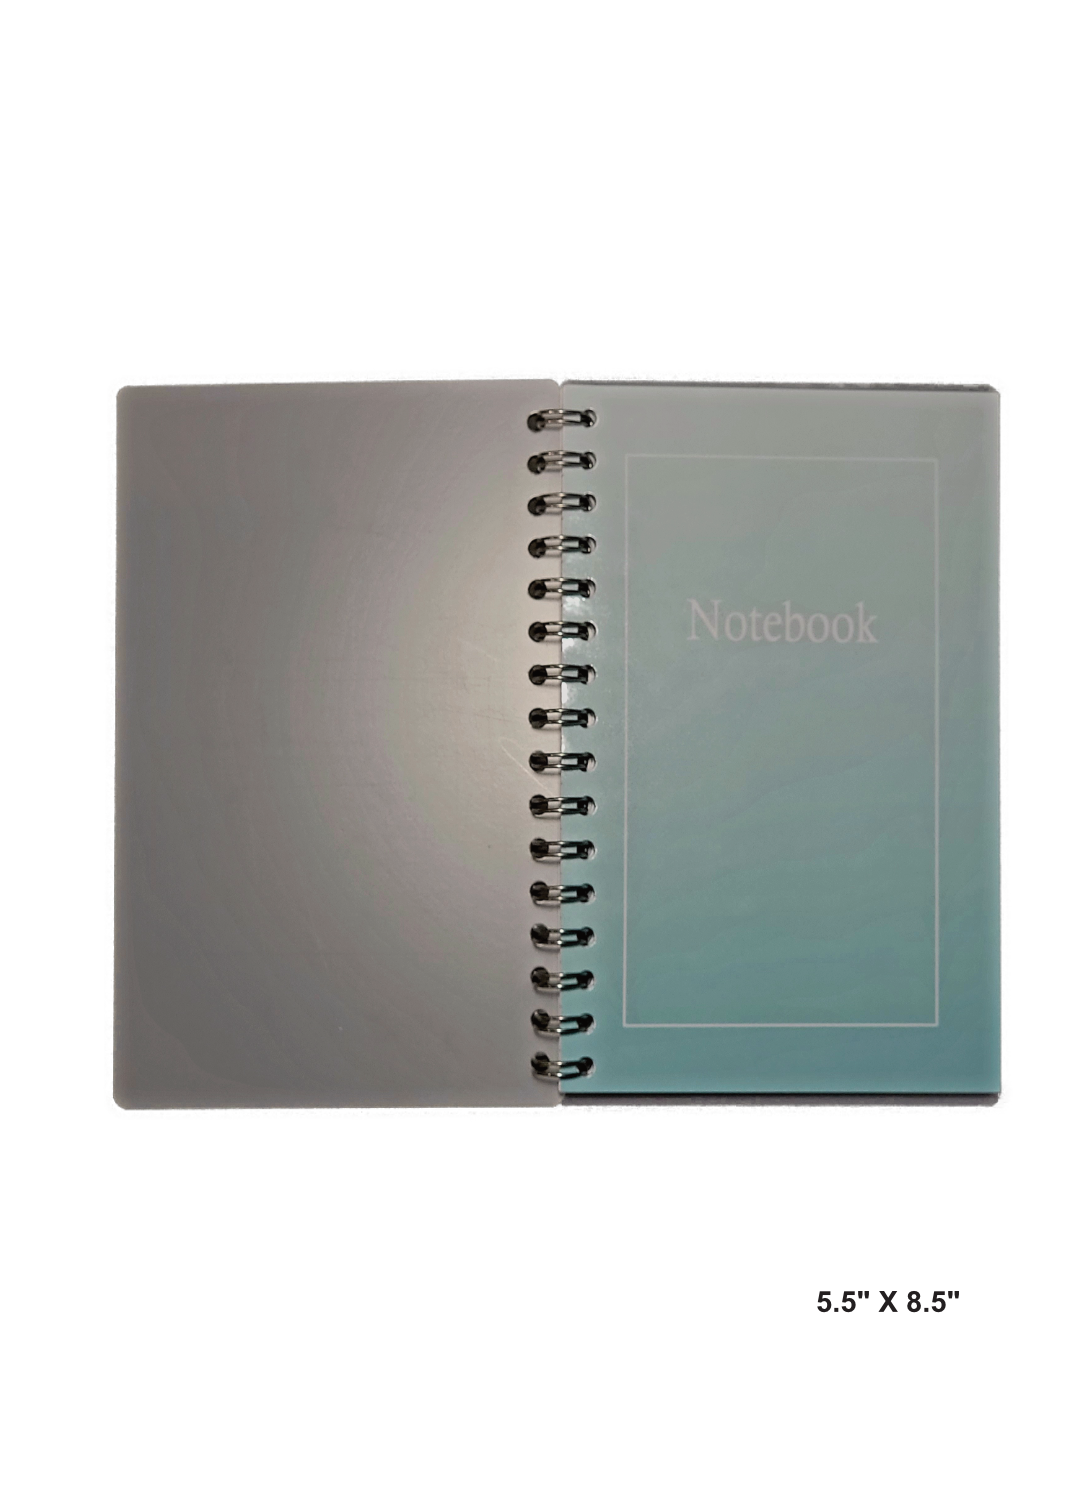 Image of hand-made 5.5" x 8.5" notebook with teal ombre color cover. The notebook's pages are lined for writing or journaling.